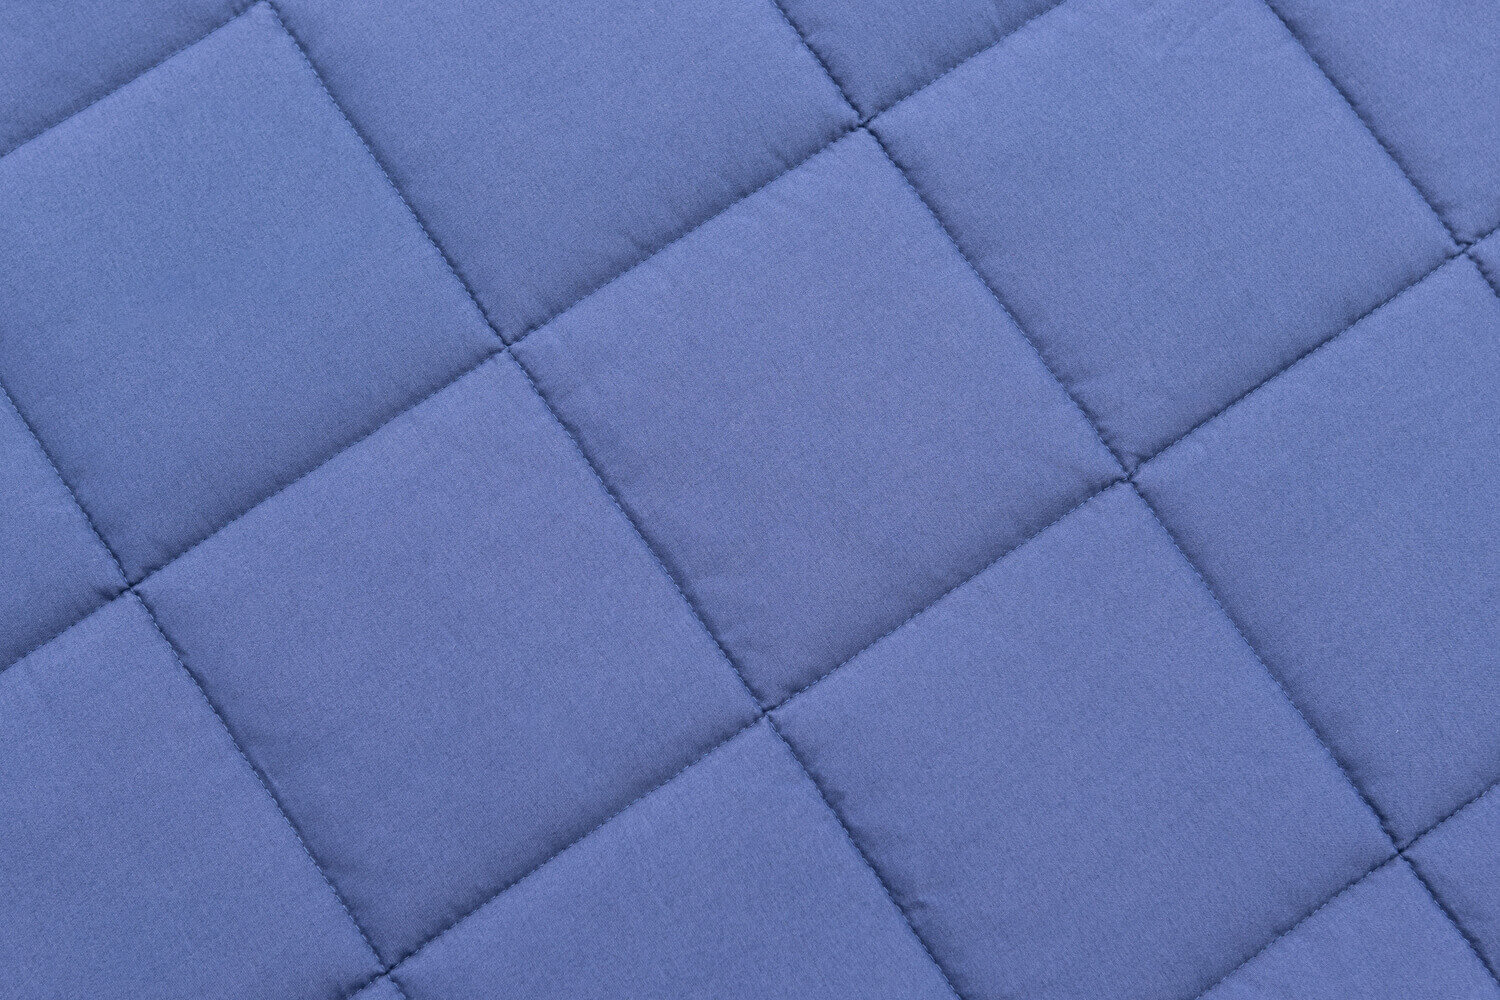 Closeup of the quilted panels and stitching on Weighted Blanket 